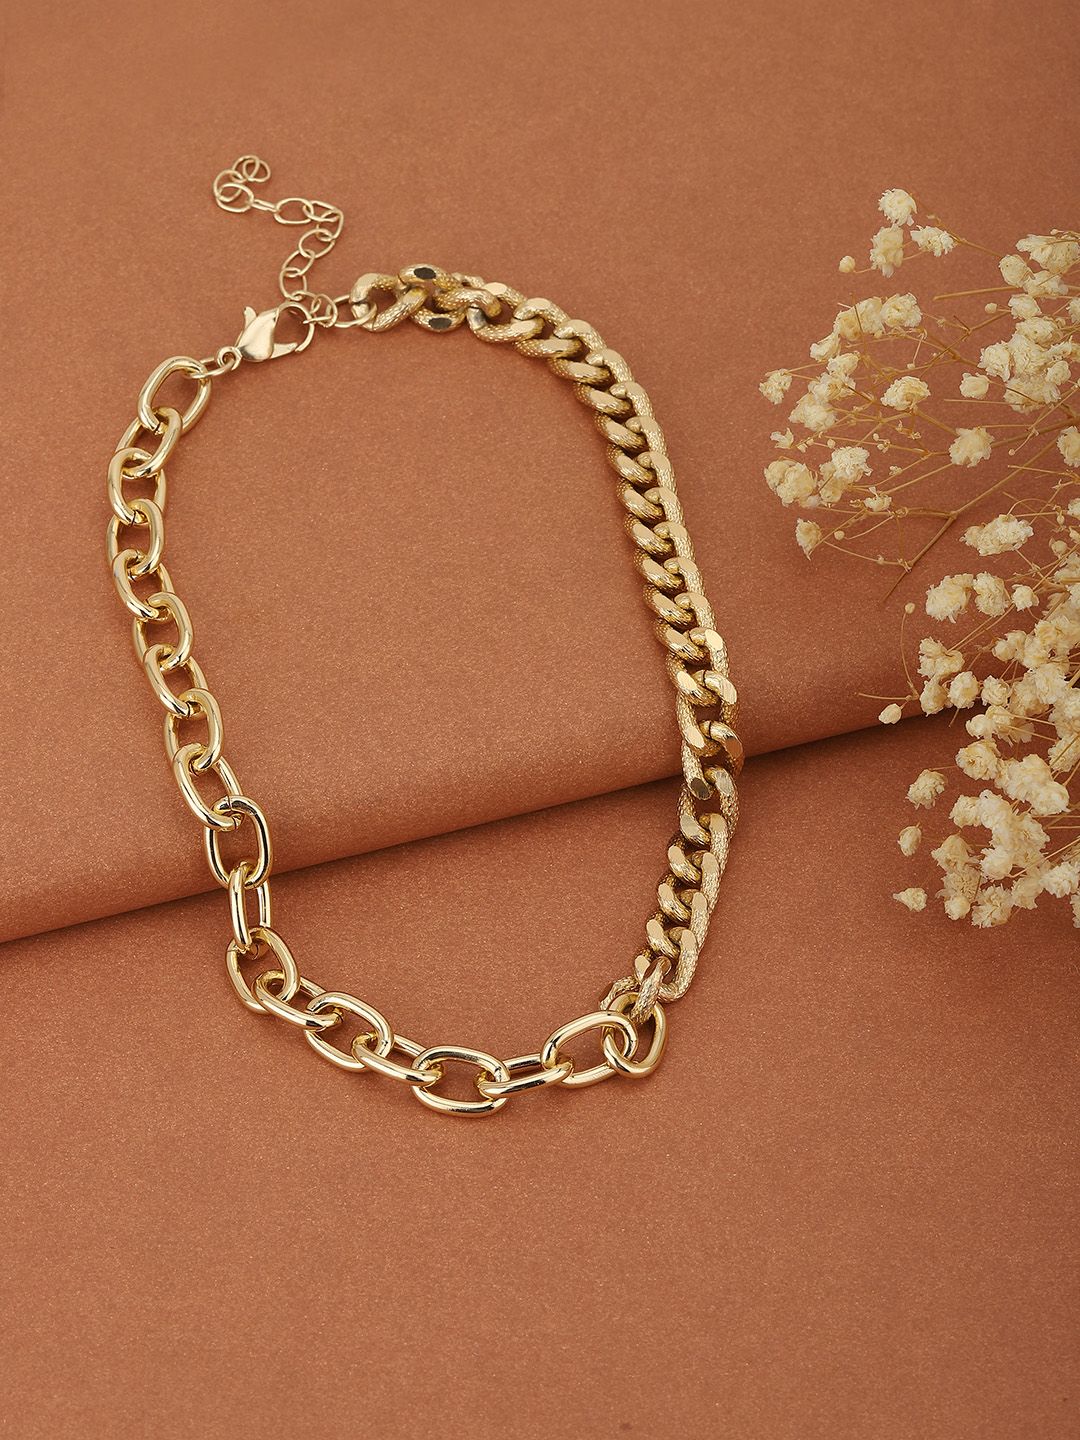 Carlton London Gold-Plated Handcrafted Link Necklace Price in India